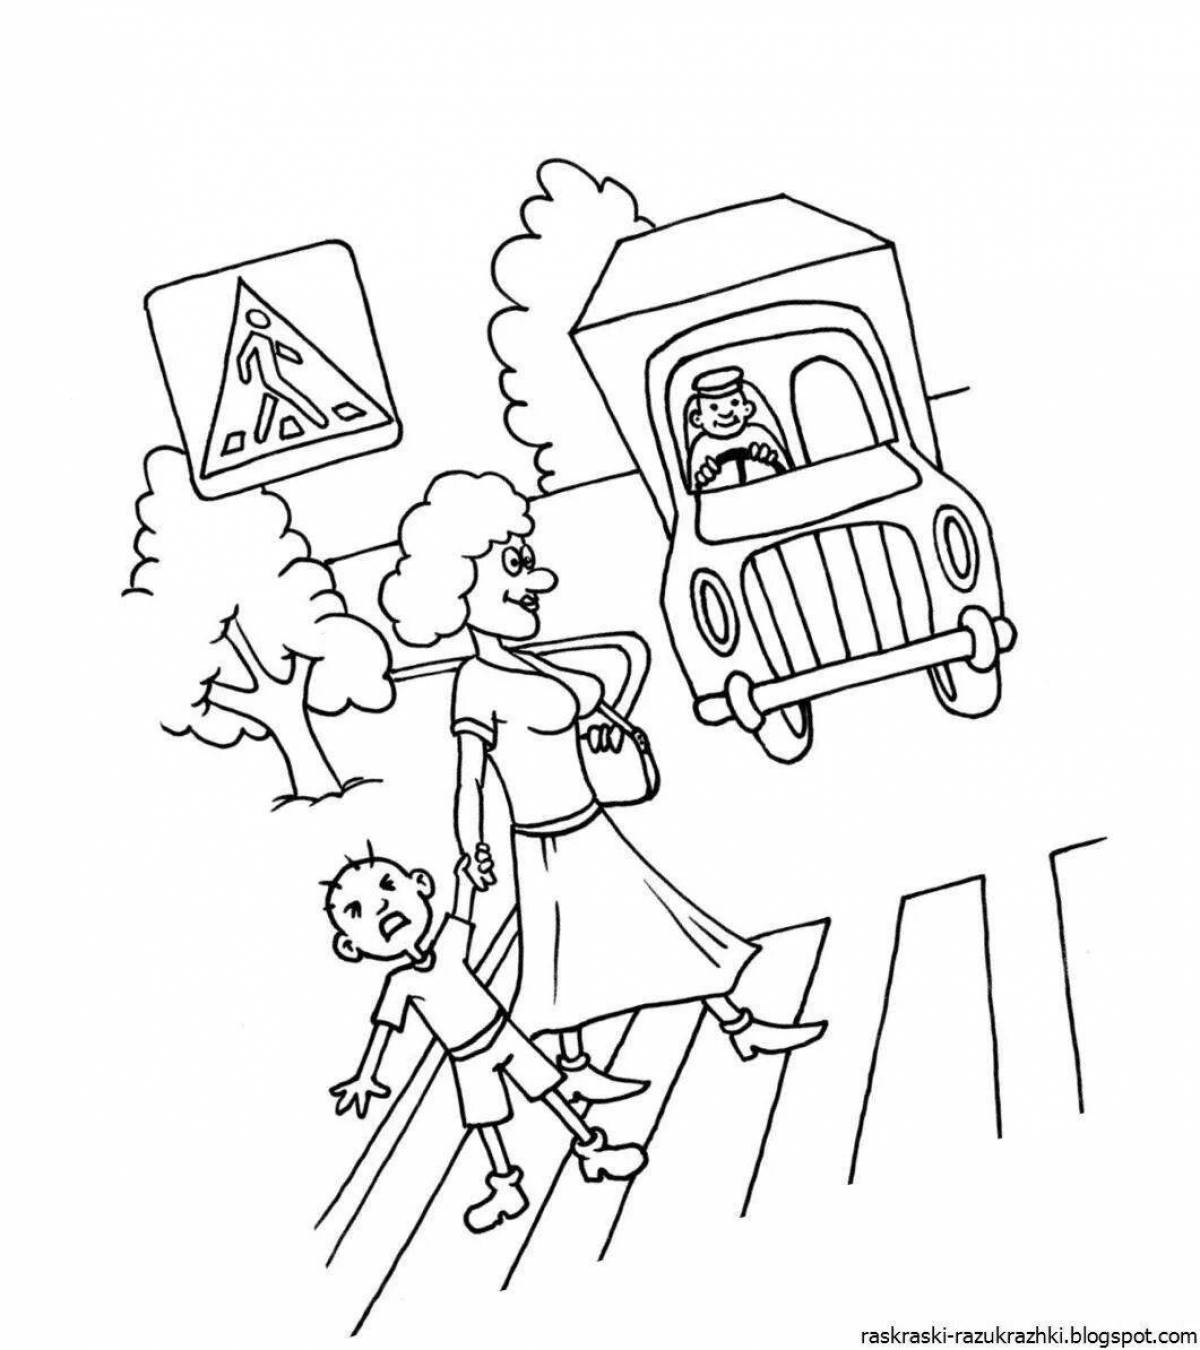 Fun road of life coloring page for kids